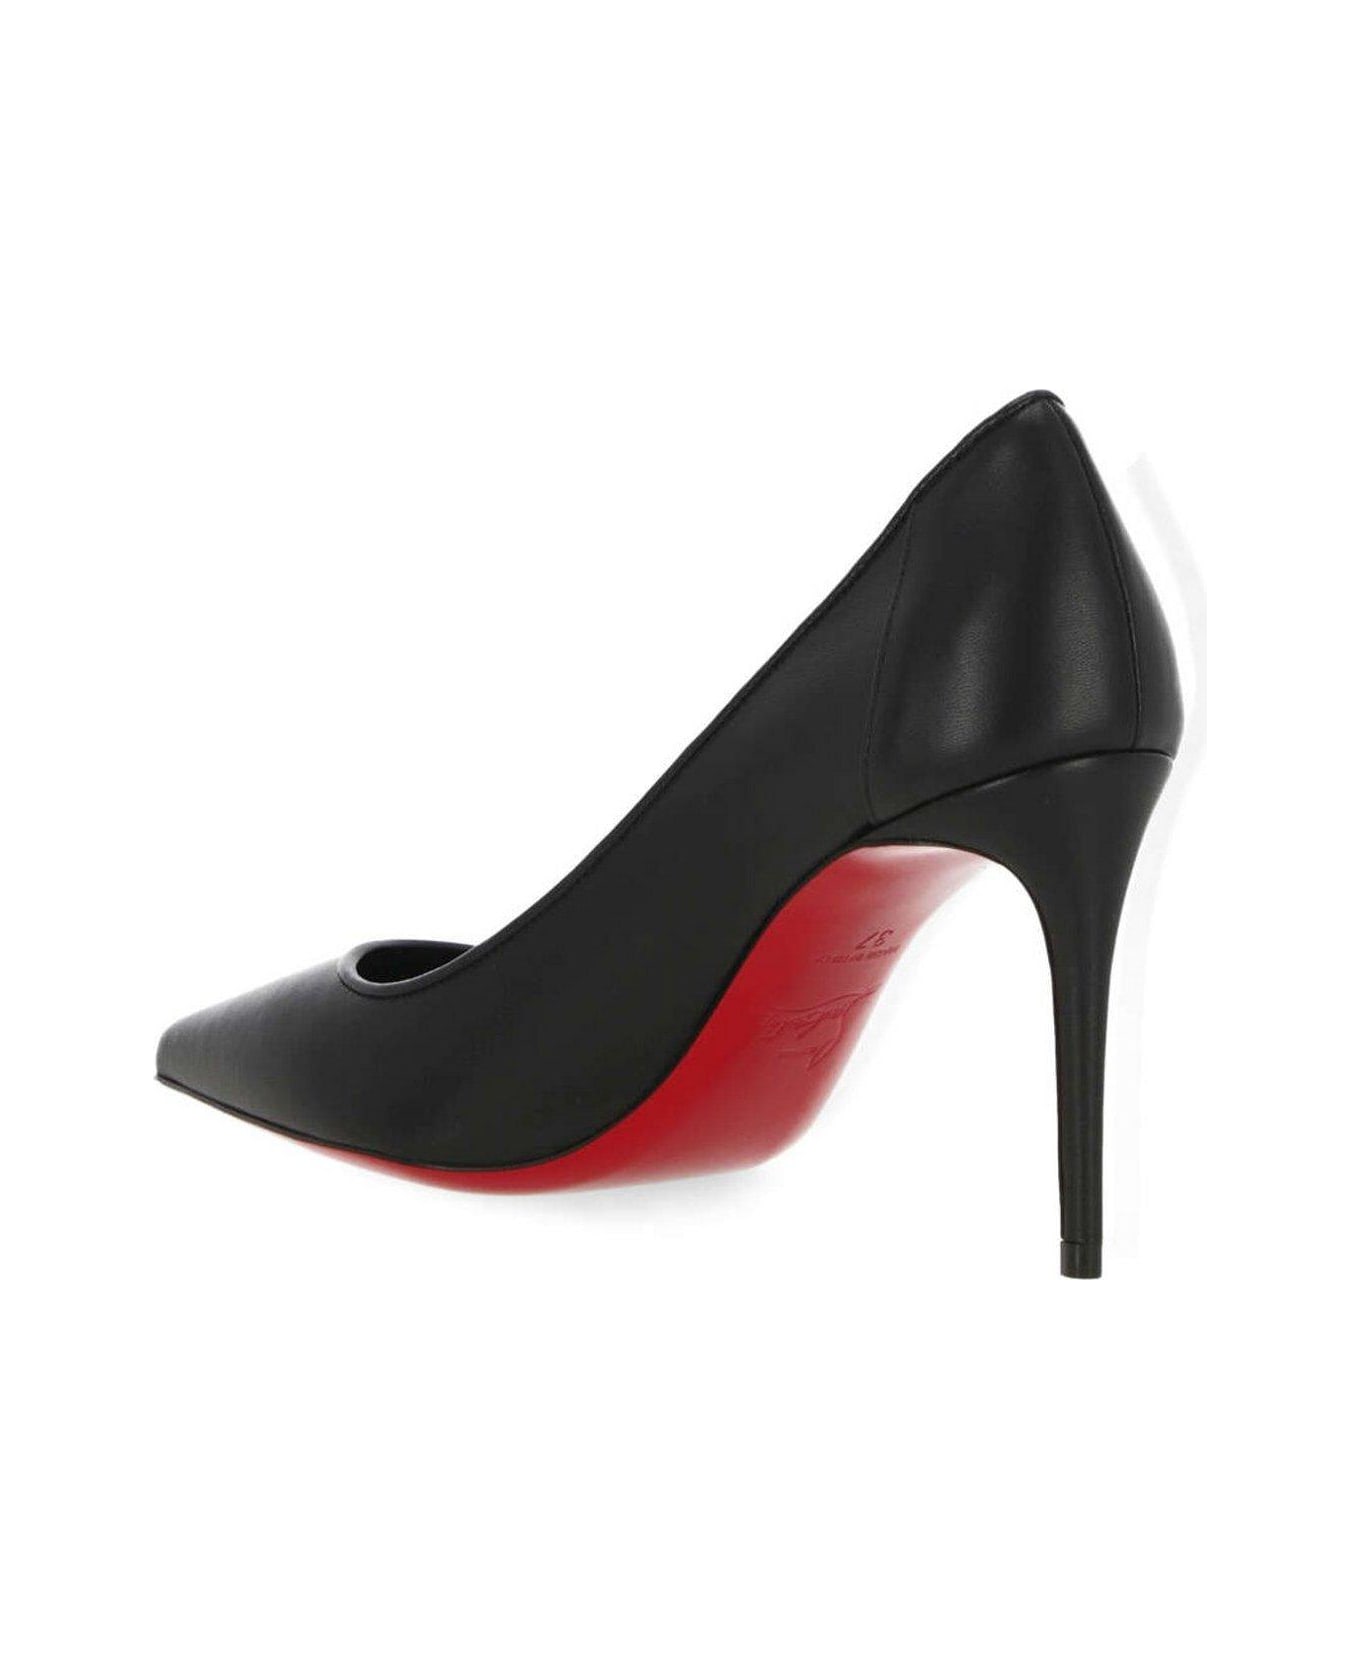 Christian Louboutin Pointed-toe Pumps - BLACK